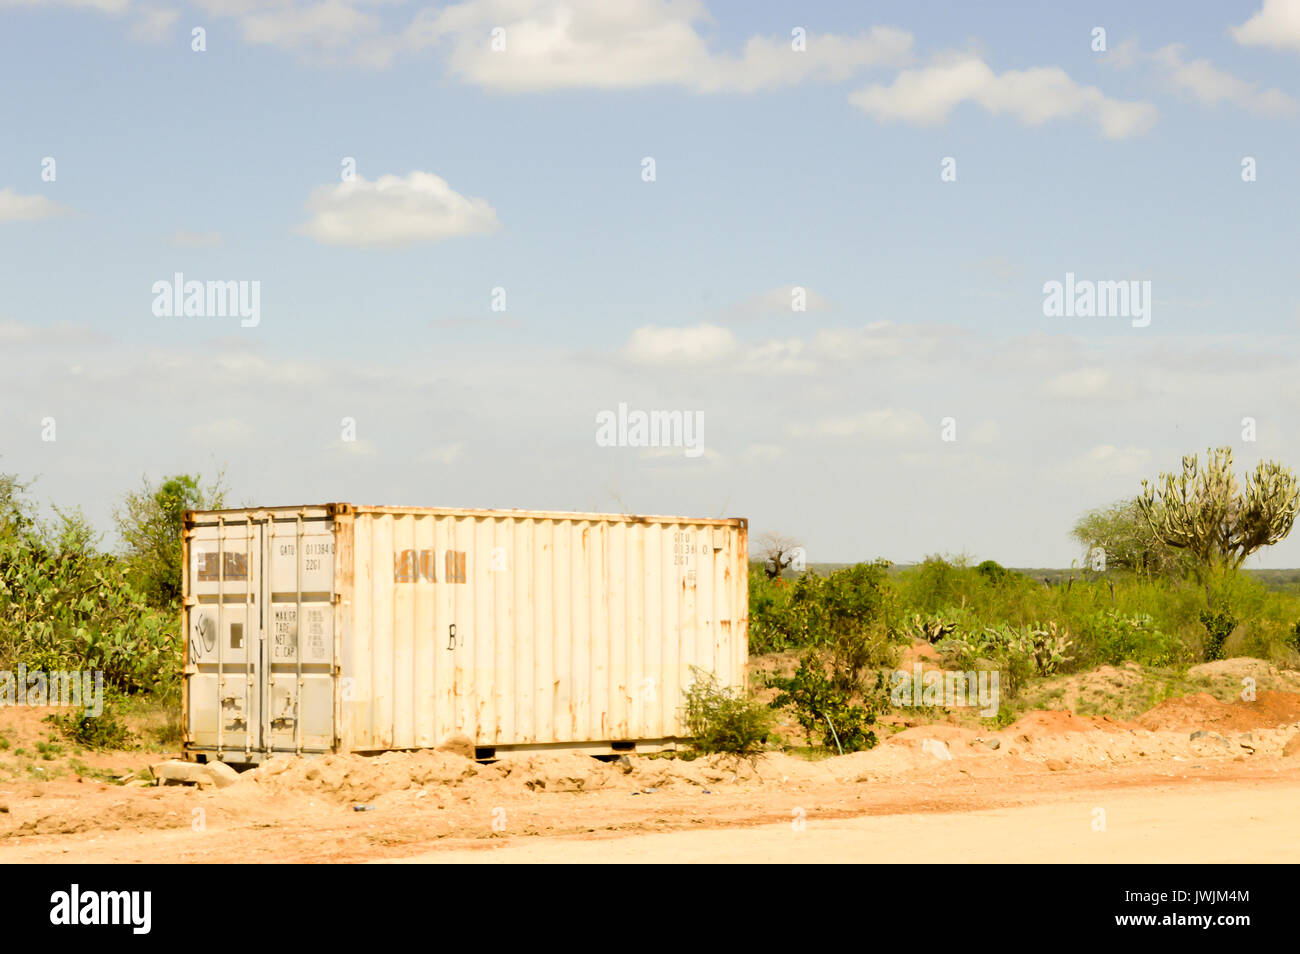 White metal containers located along a road in Kenya Stock Photo